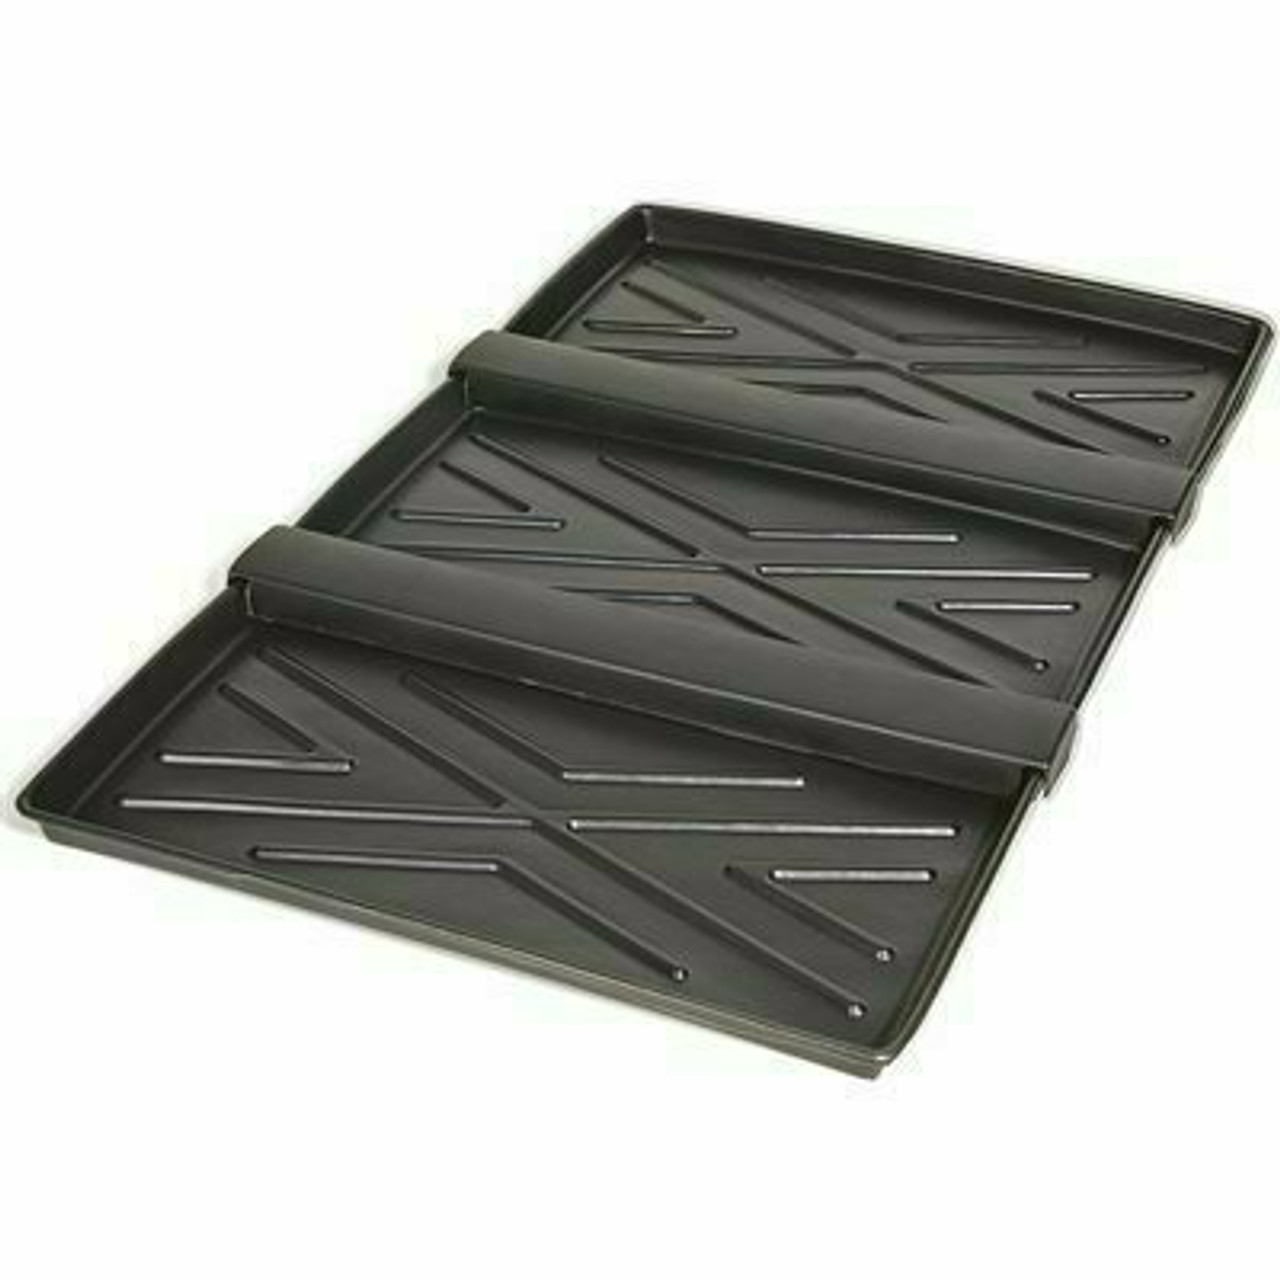 Ultratech International Rack Containment Single Tray